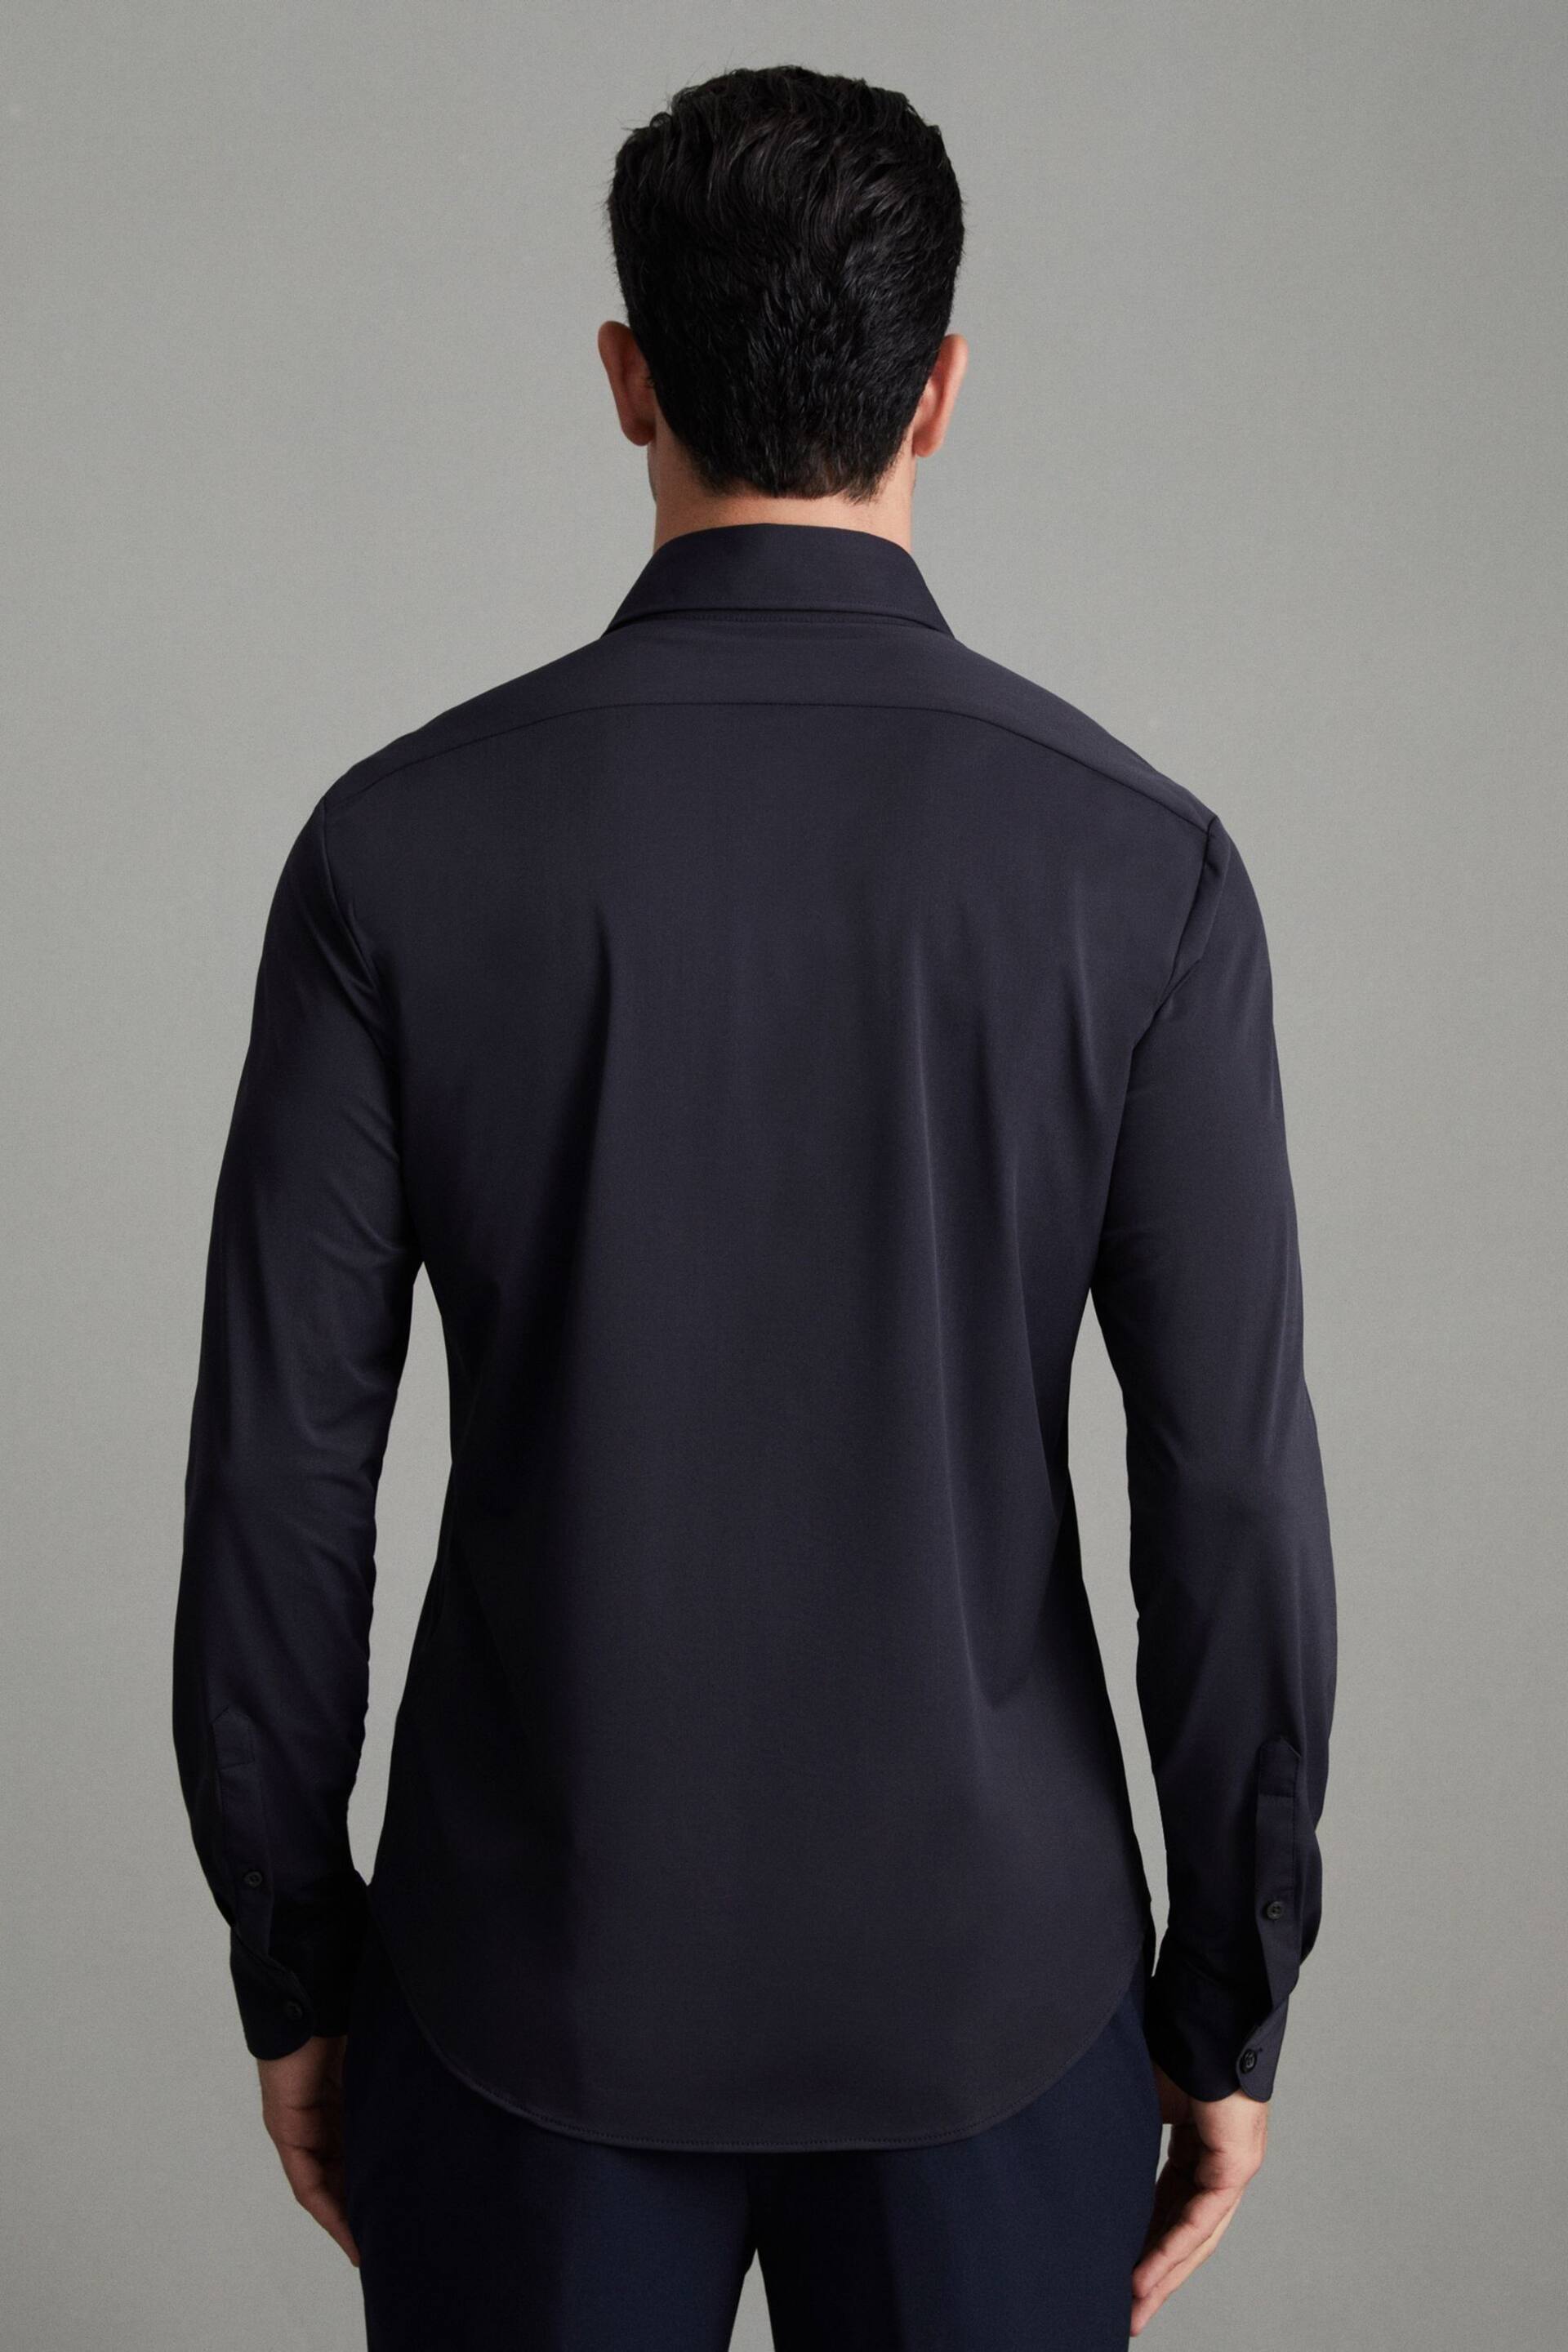 Reiss Navy Voyager Slim Fit Button-Through Travel Shirt - Image 4 of 6